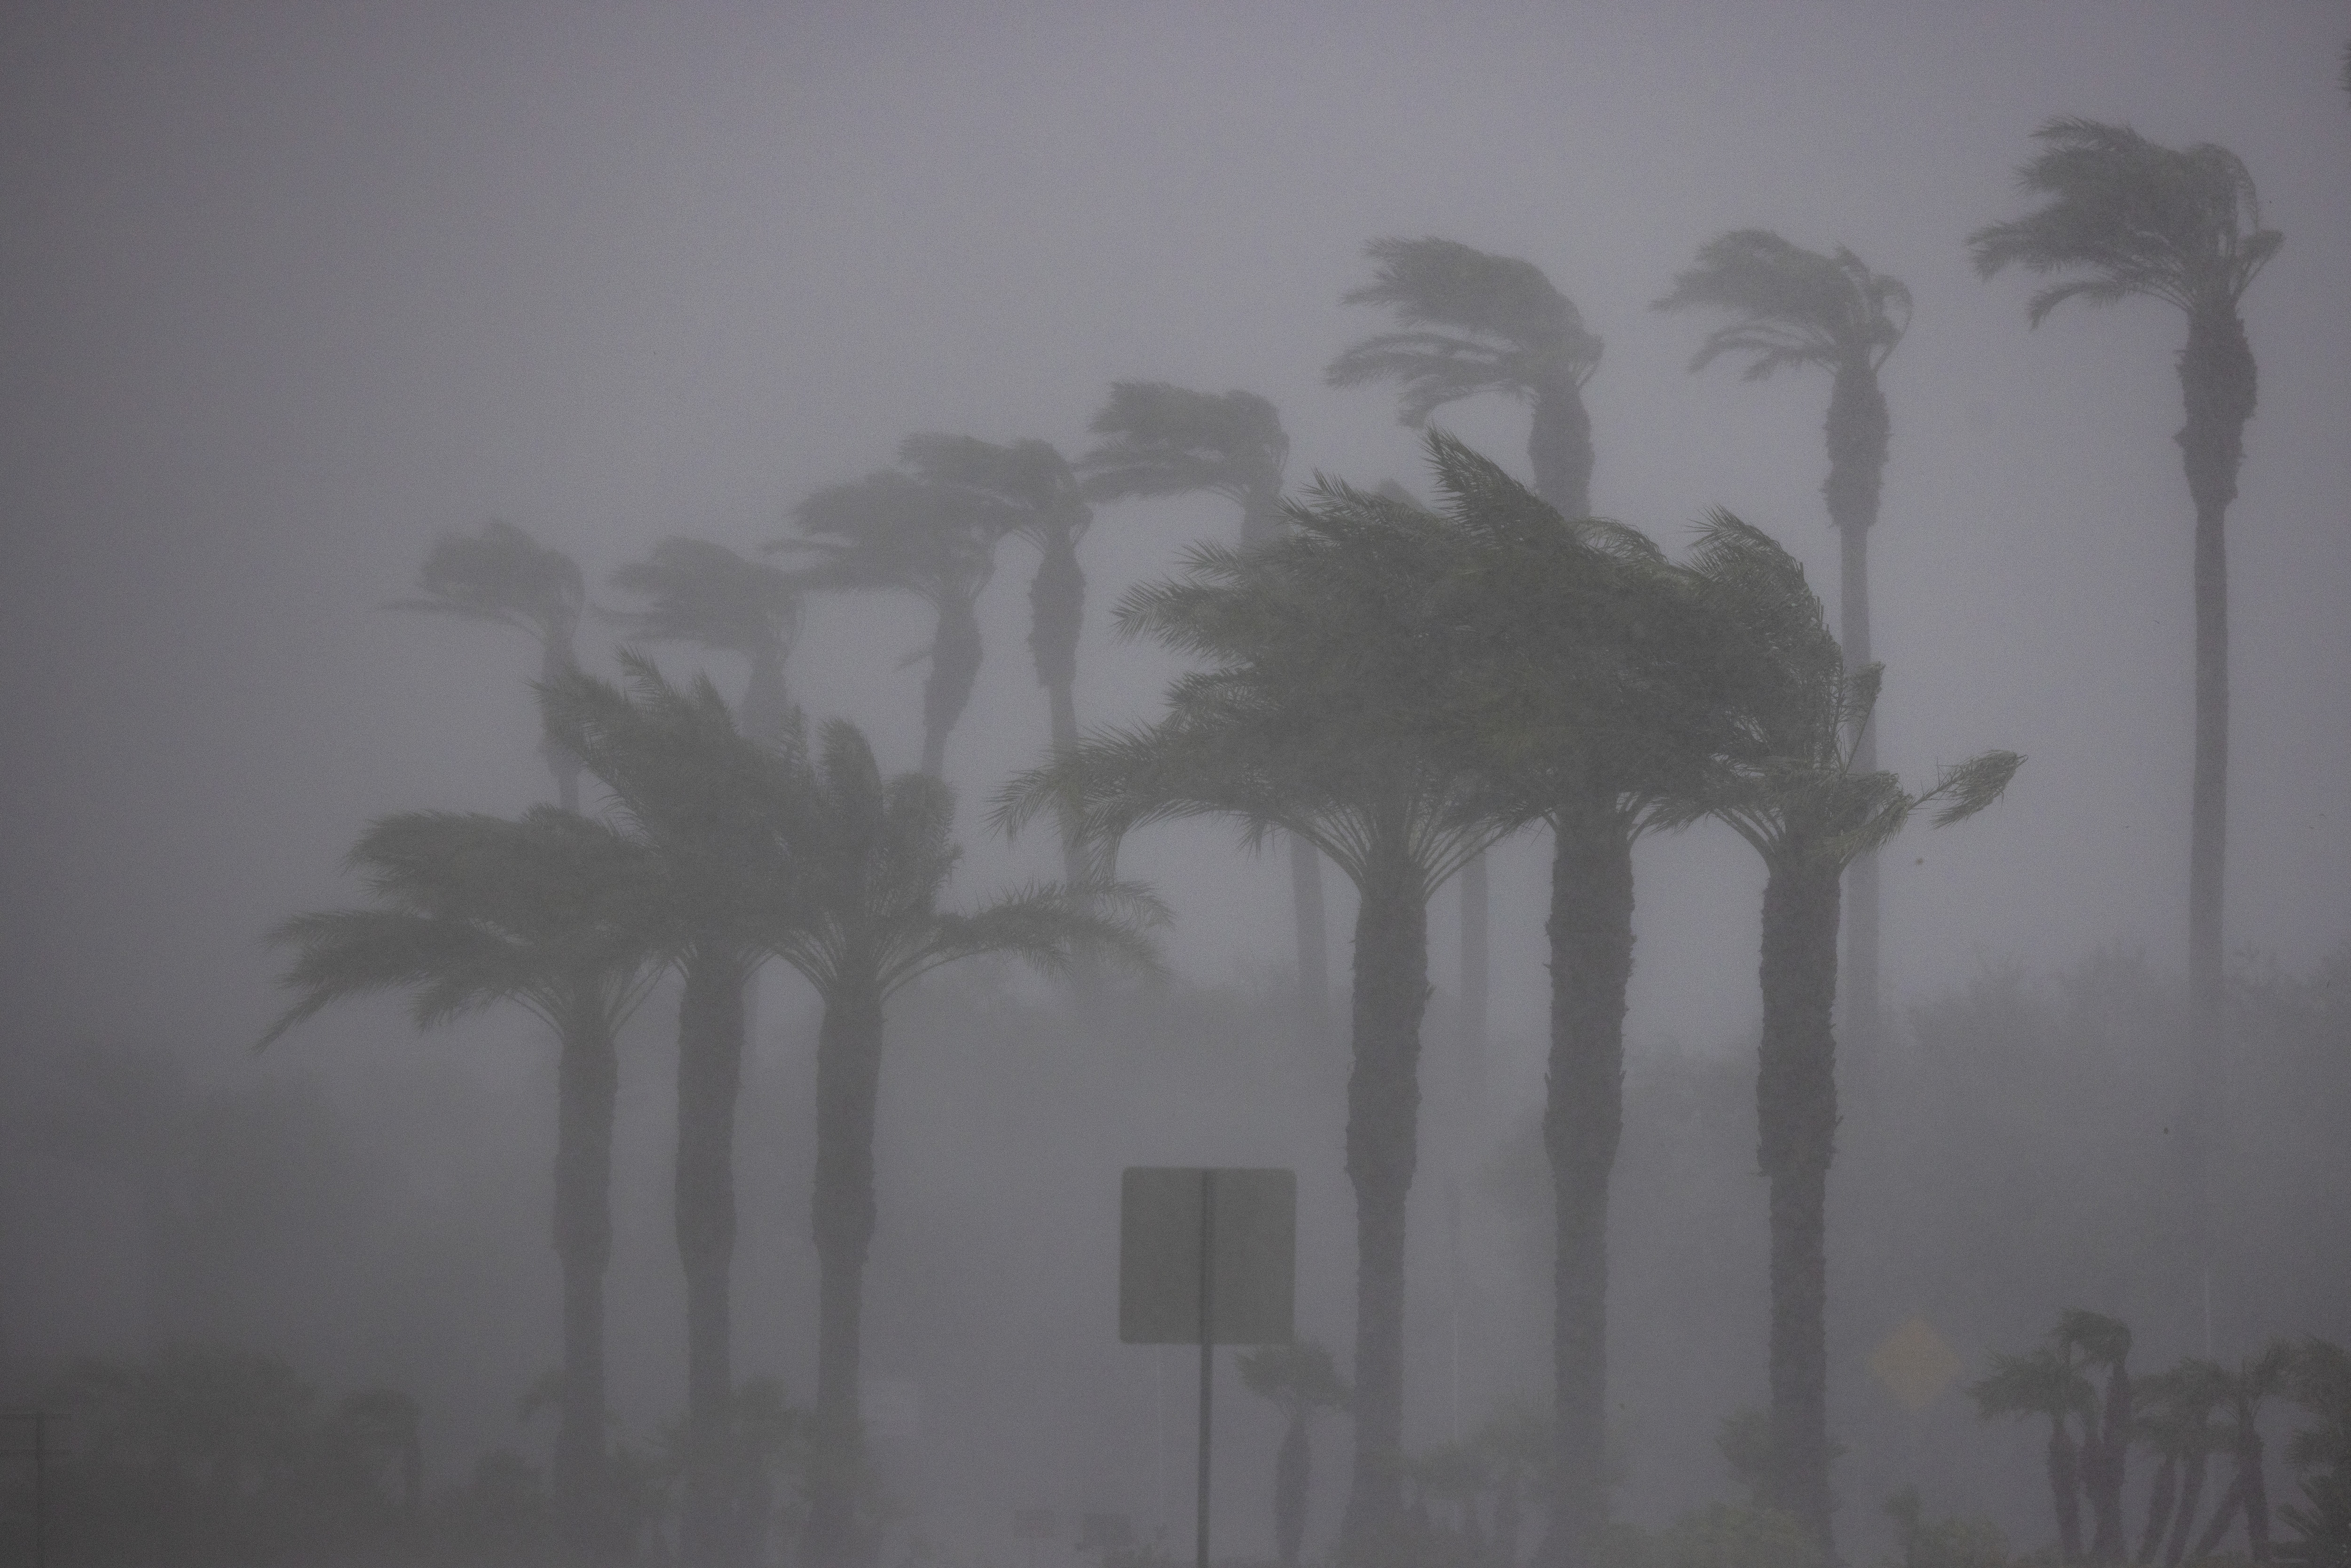 Heavy rain and wind battering palm trees